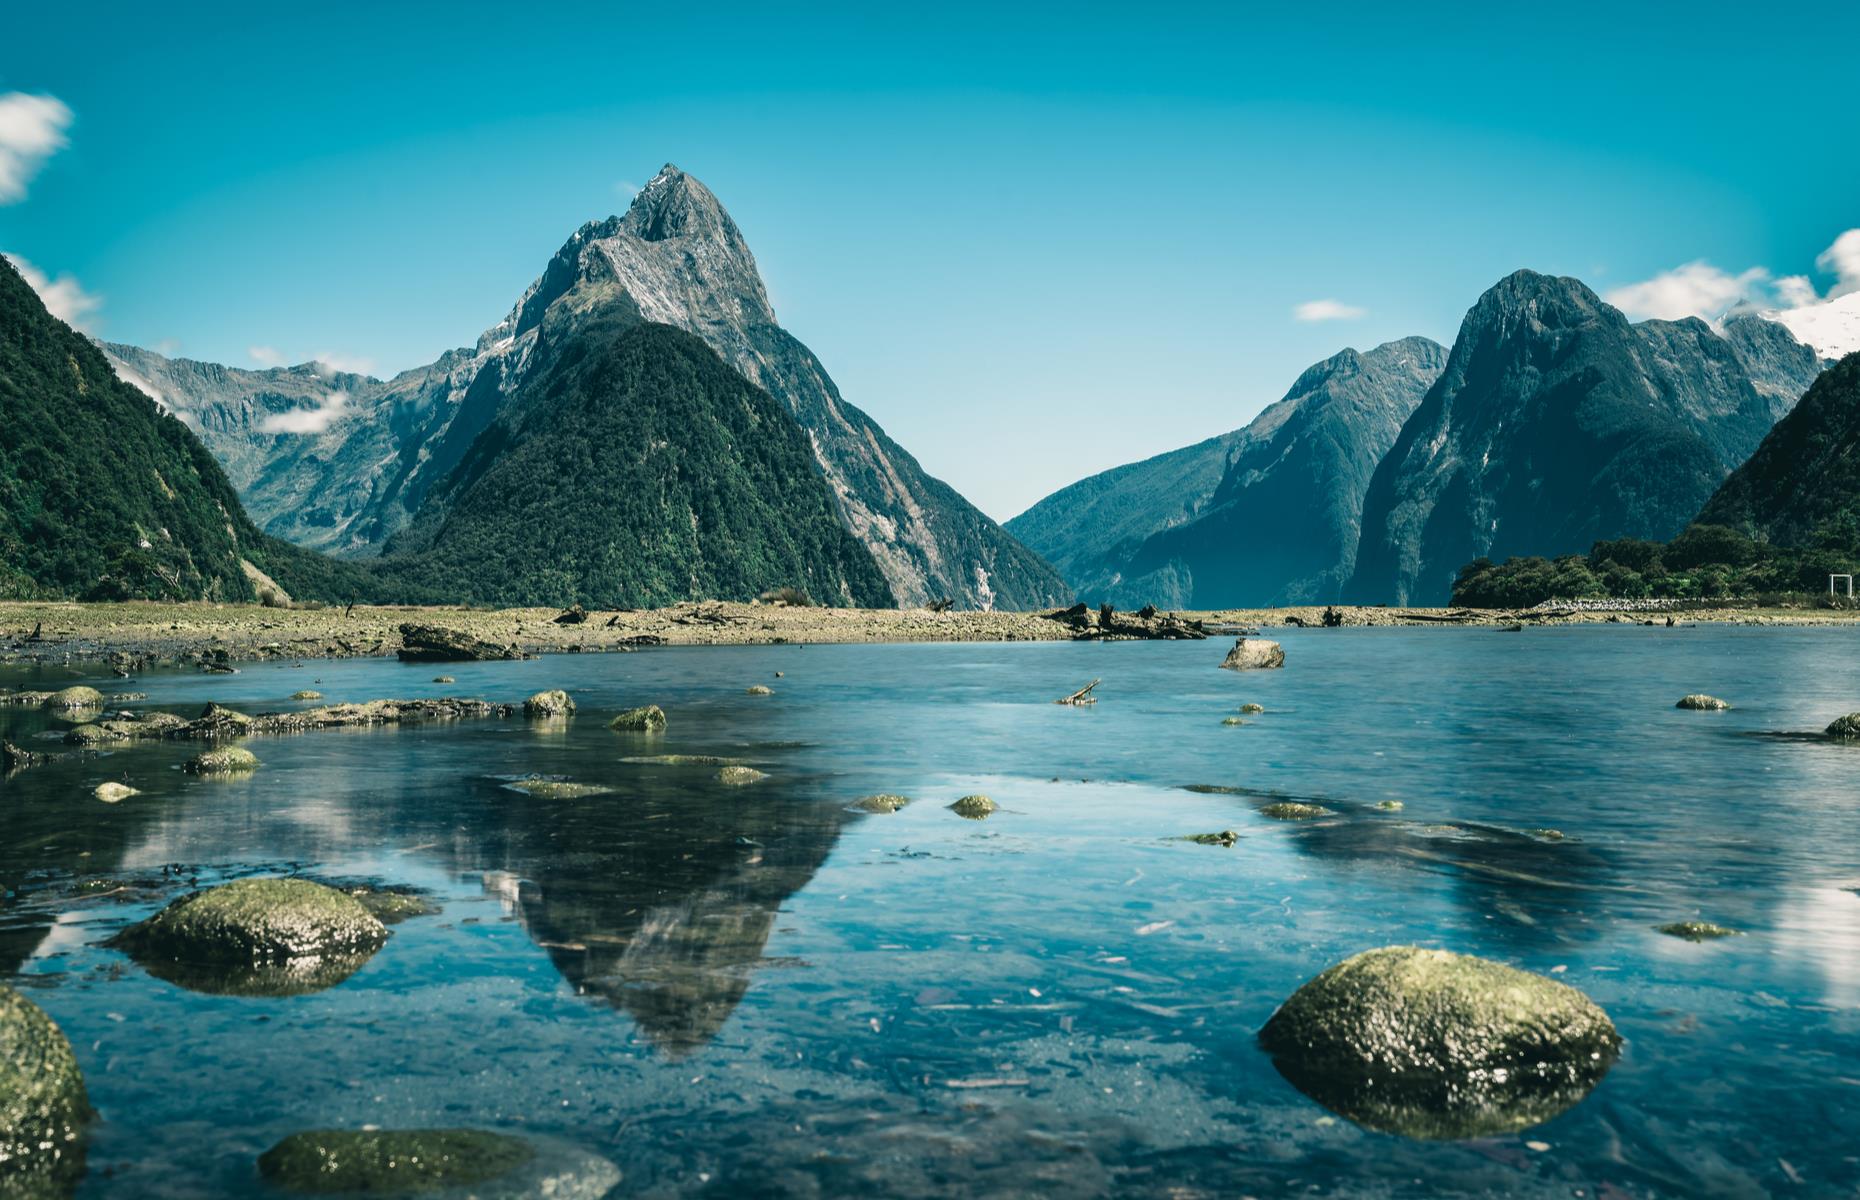 <p>New Zealand topped the Asia-Pacific region and had sky-high scores for safety and security. The stunning destination, known for the breathtaking scenery that featured in the <em>Lord of the Rings</em> franchise, will be back on many tourists’ radars after it fully reopened its international borders earlier this year. </p>